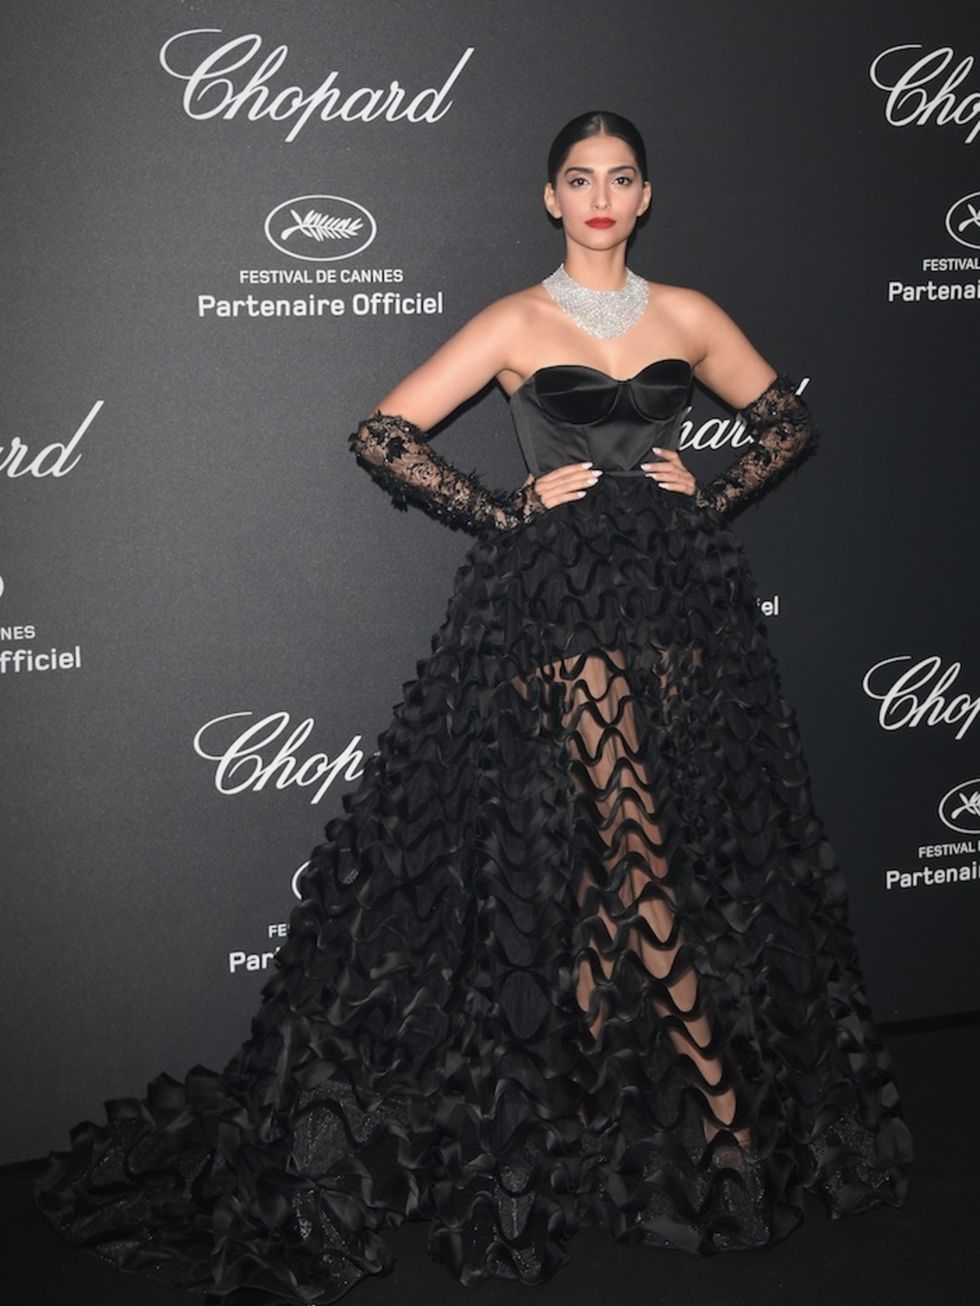 Sonam Kapoor attends Chopard Wild Party as part of The 69th Annual Cannes Film Festival